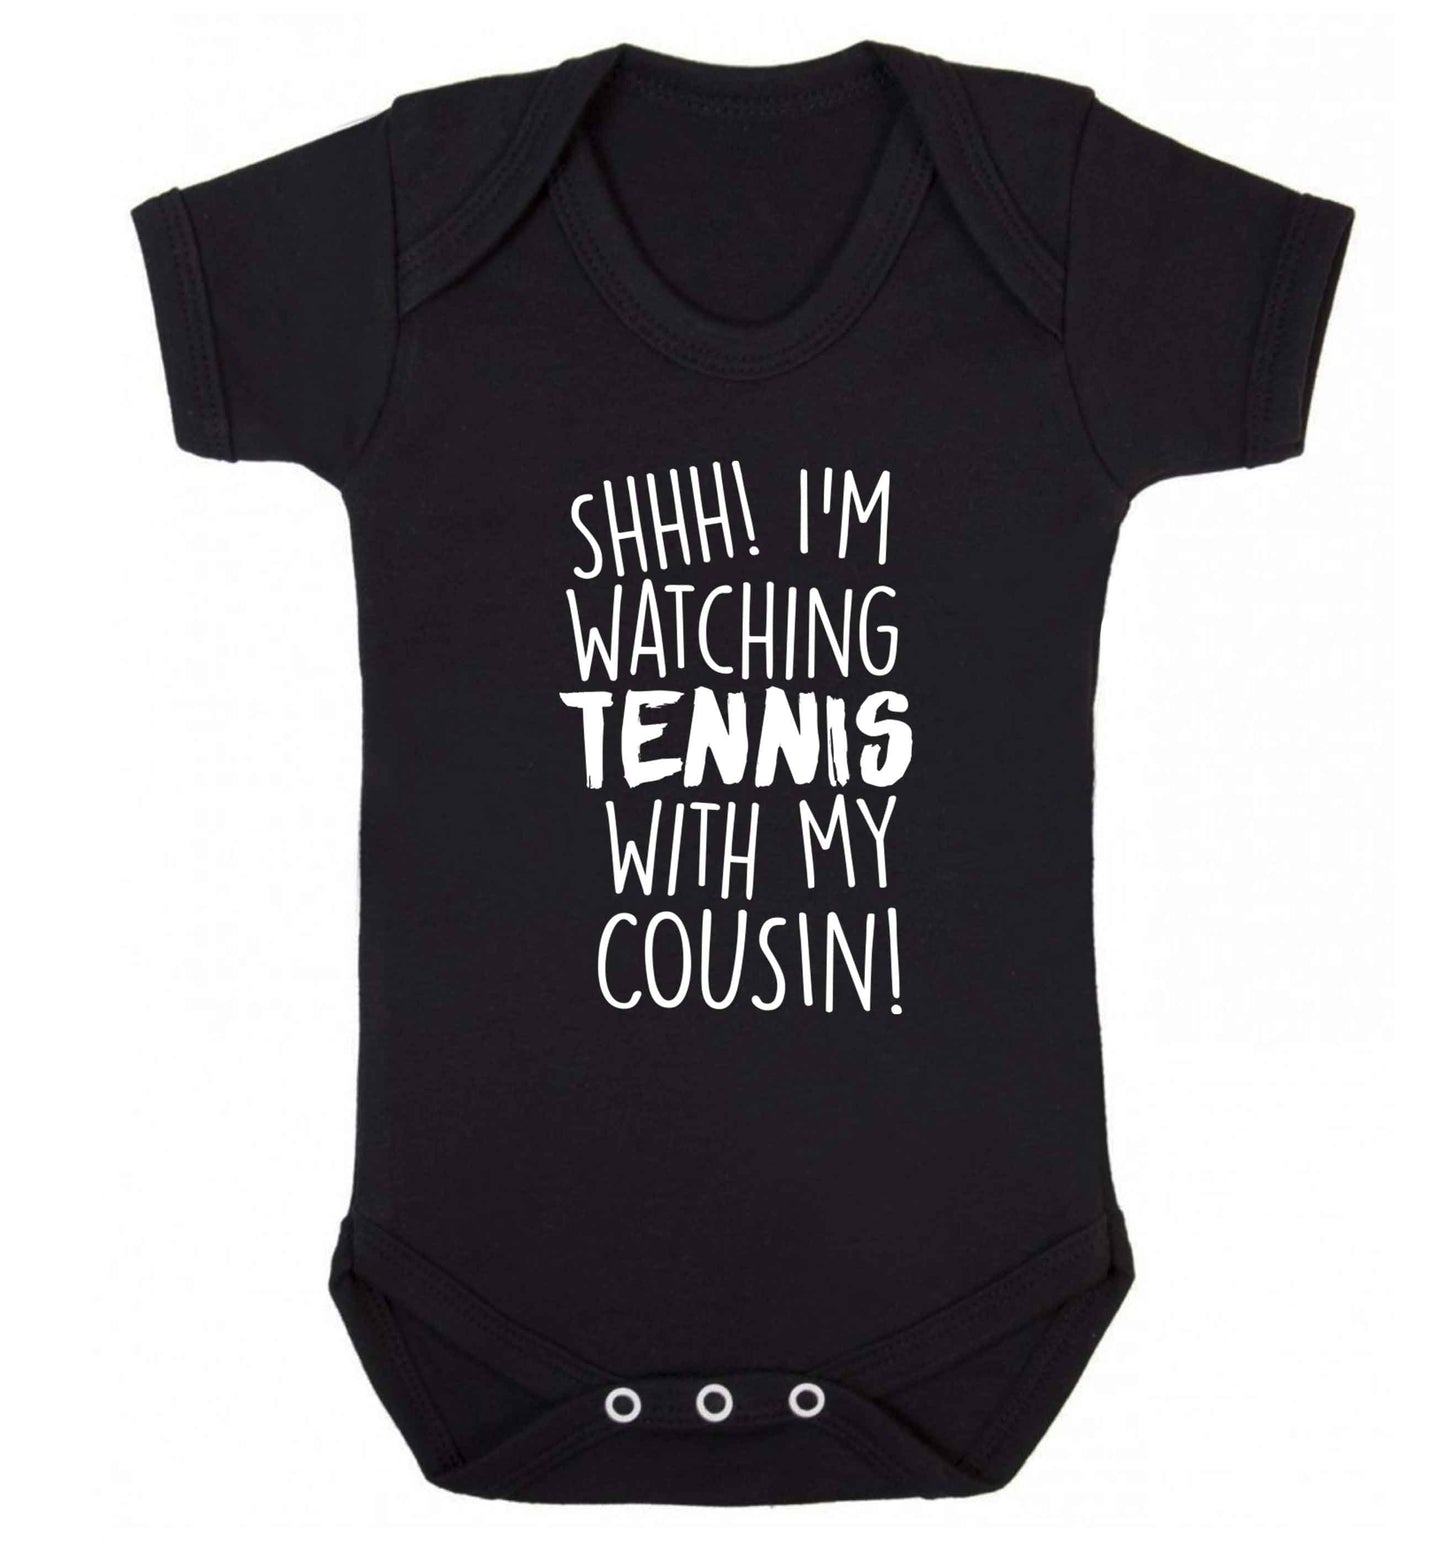 Shh! I'm watching tennis with my cousin! Baby Vest black 18-24 months